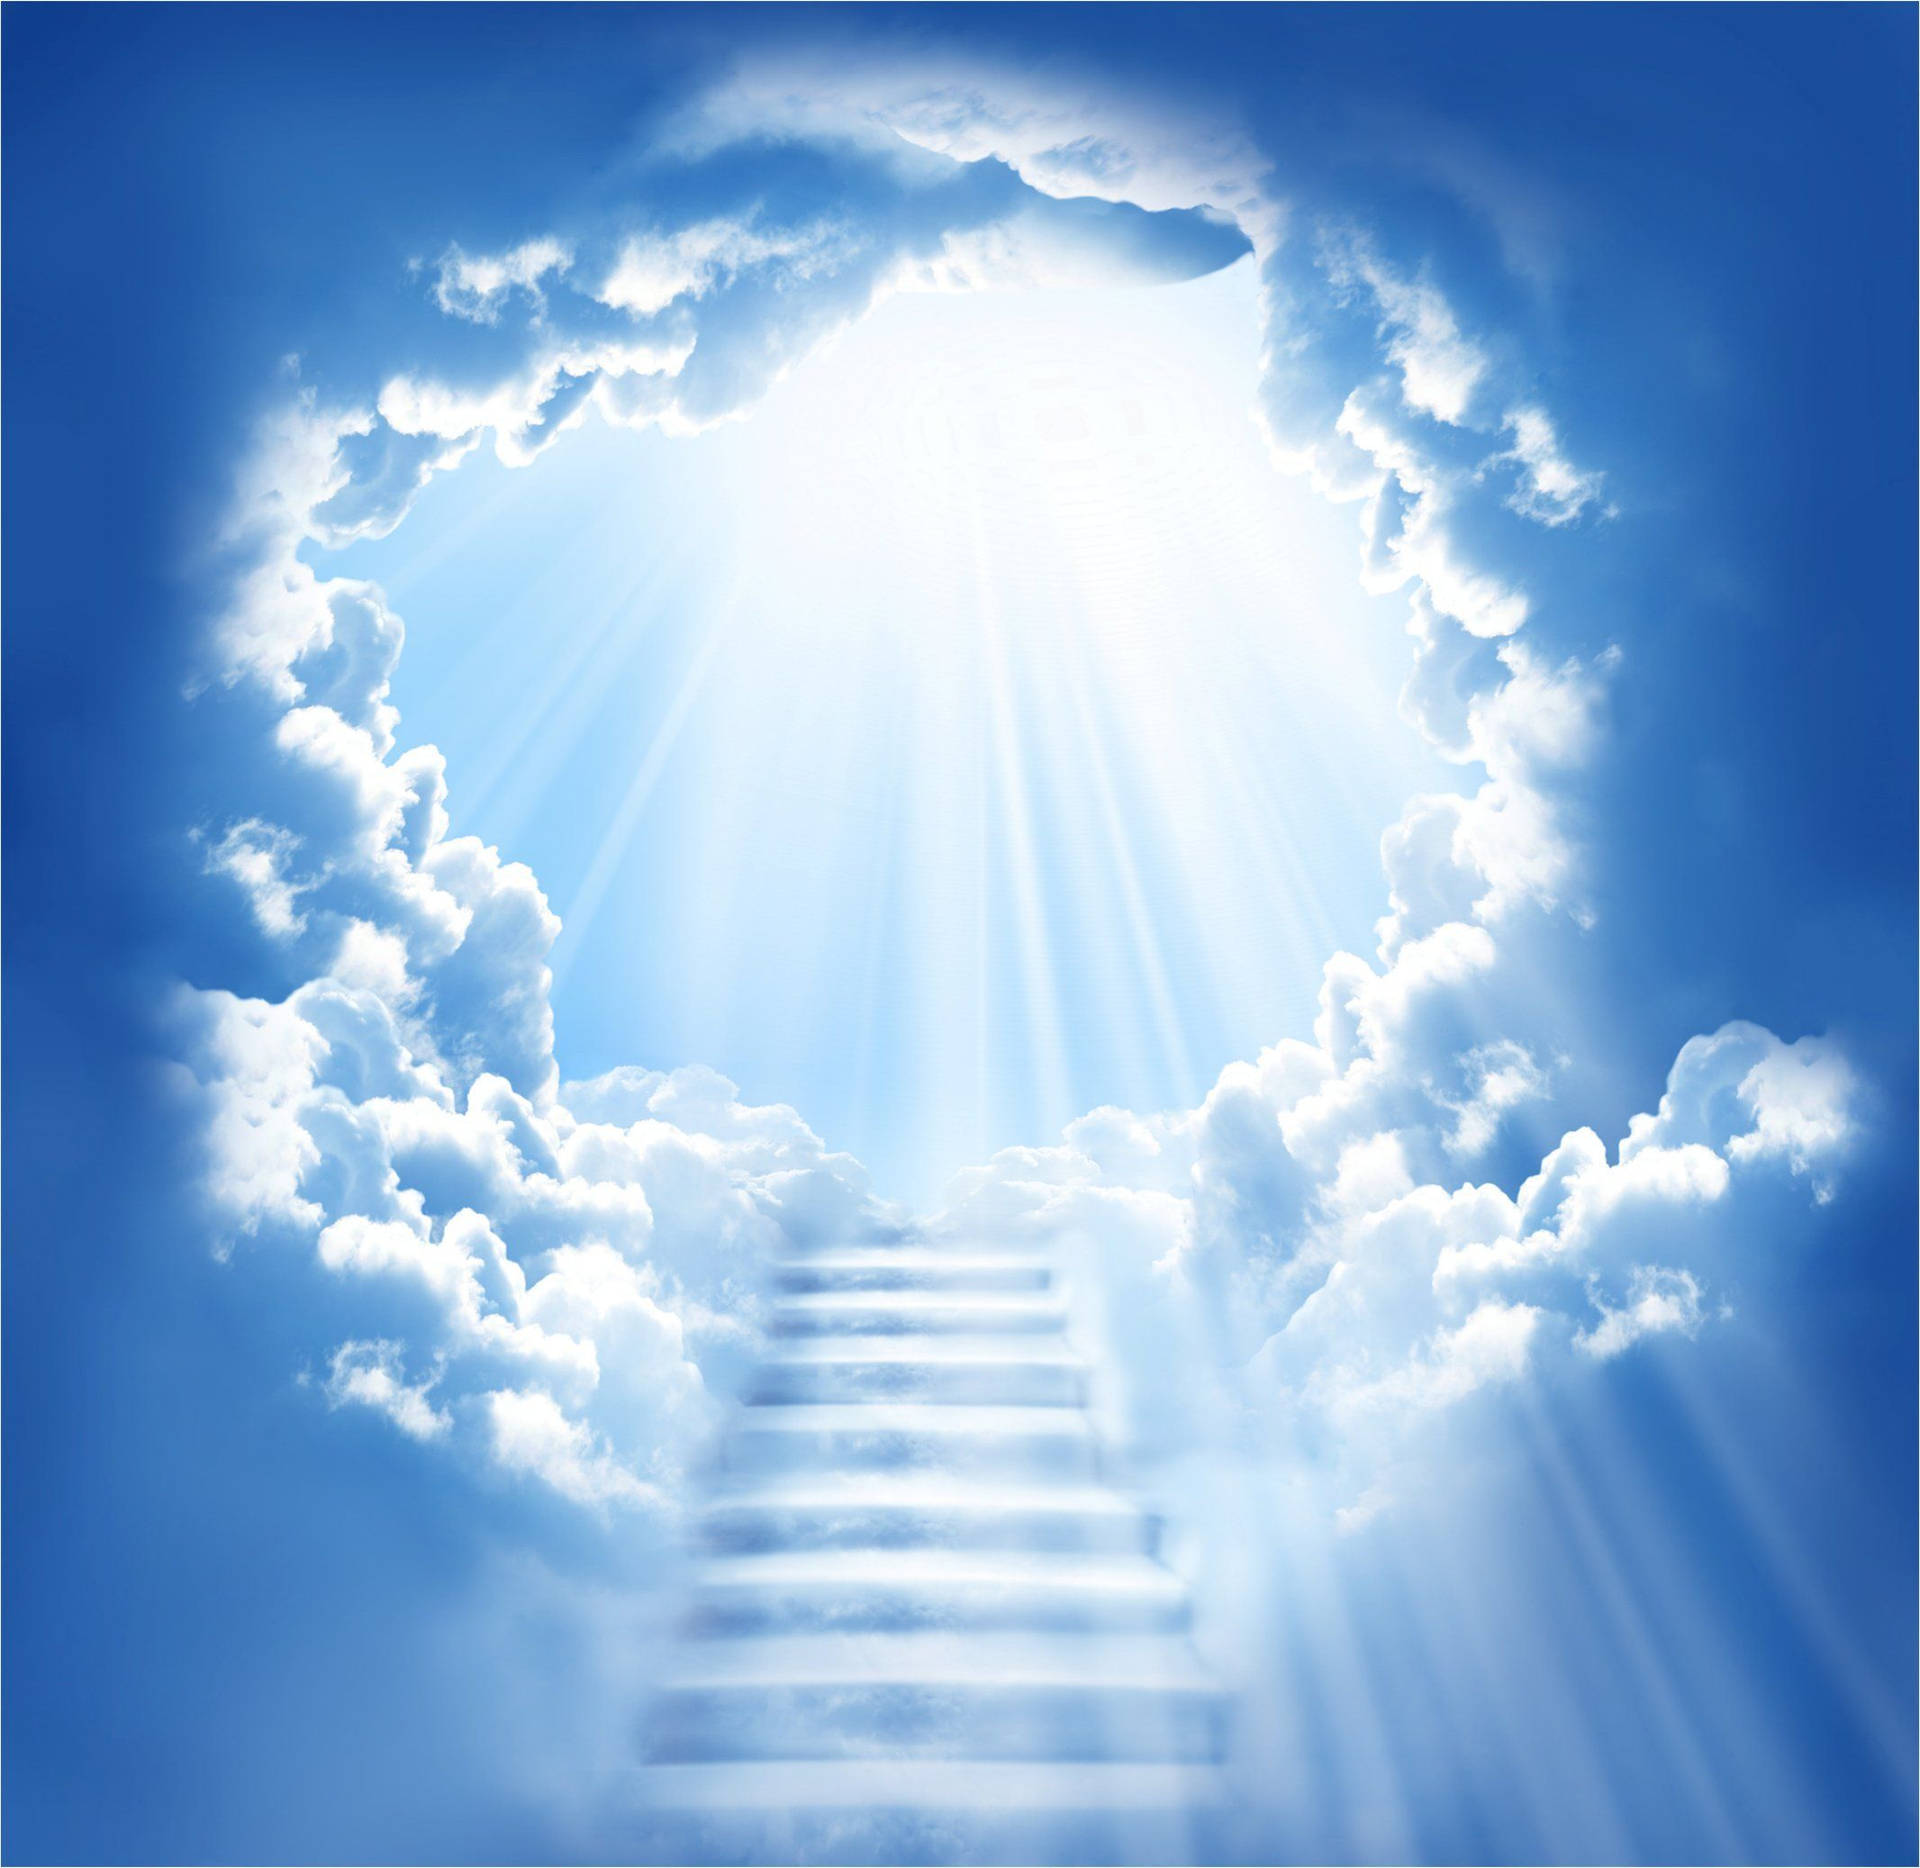 Funeral Clouds With Stairway To Heaven